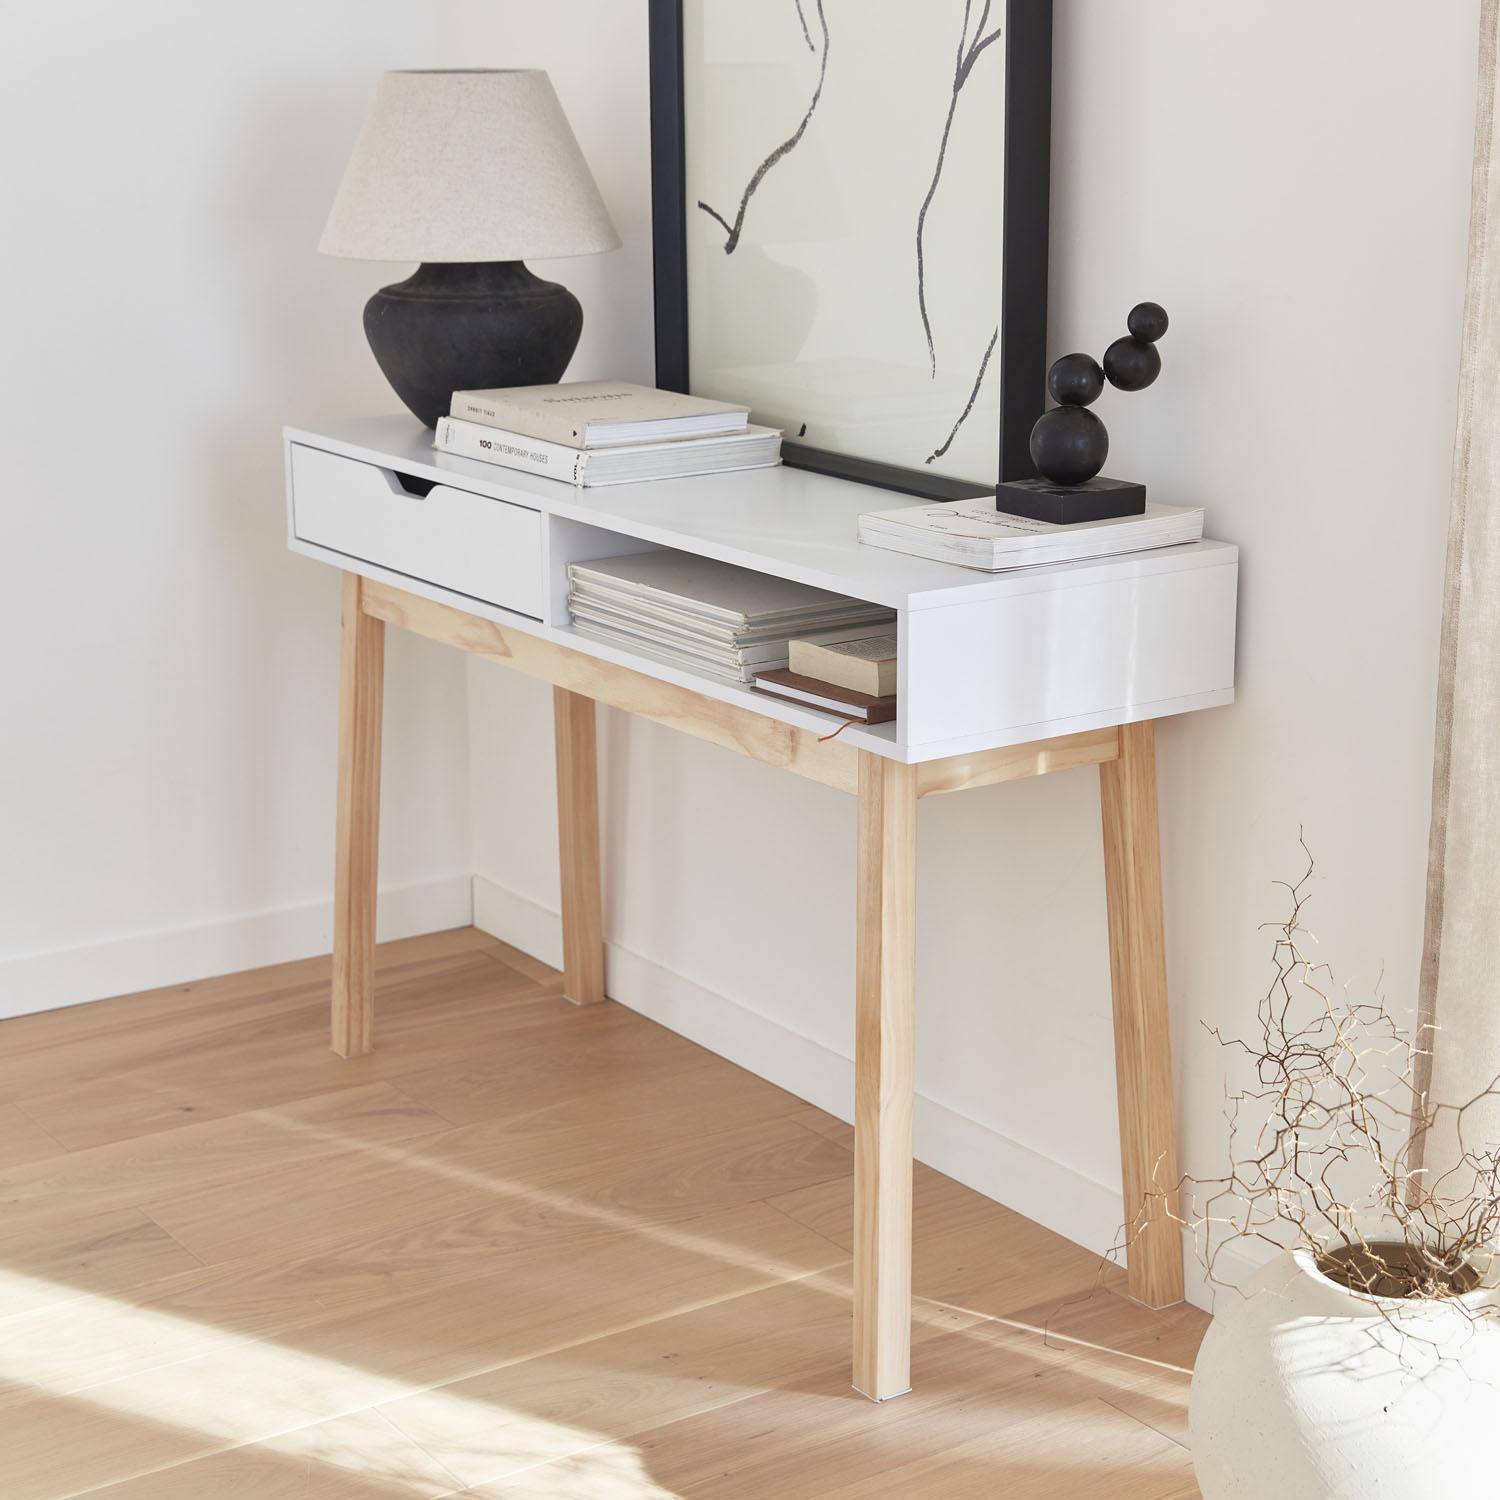 L119cm x W37cm x H74.5cm, Console with Wood Effect and Wooden Legs, 1 Drawer, white, ,sweeek,Photo2